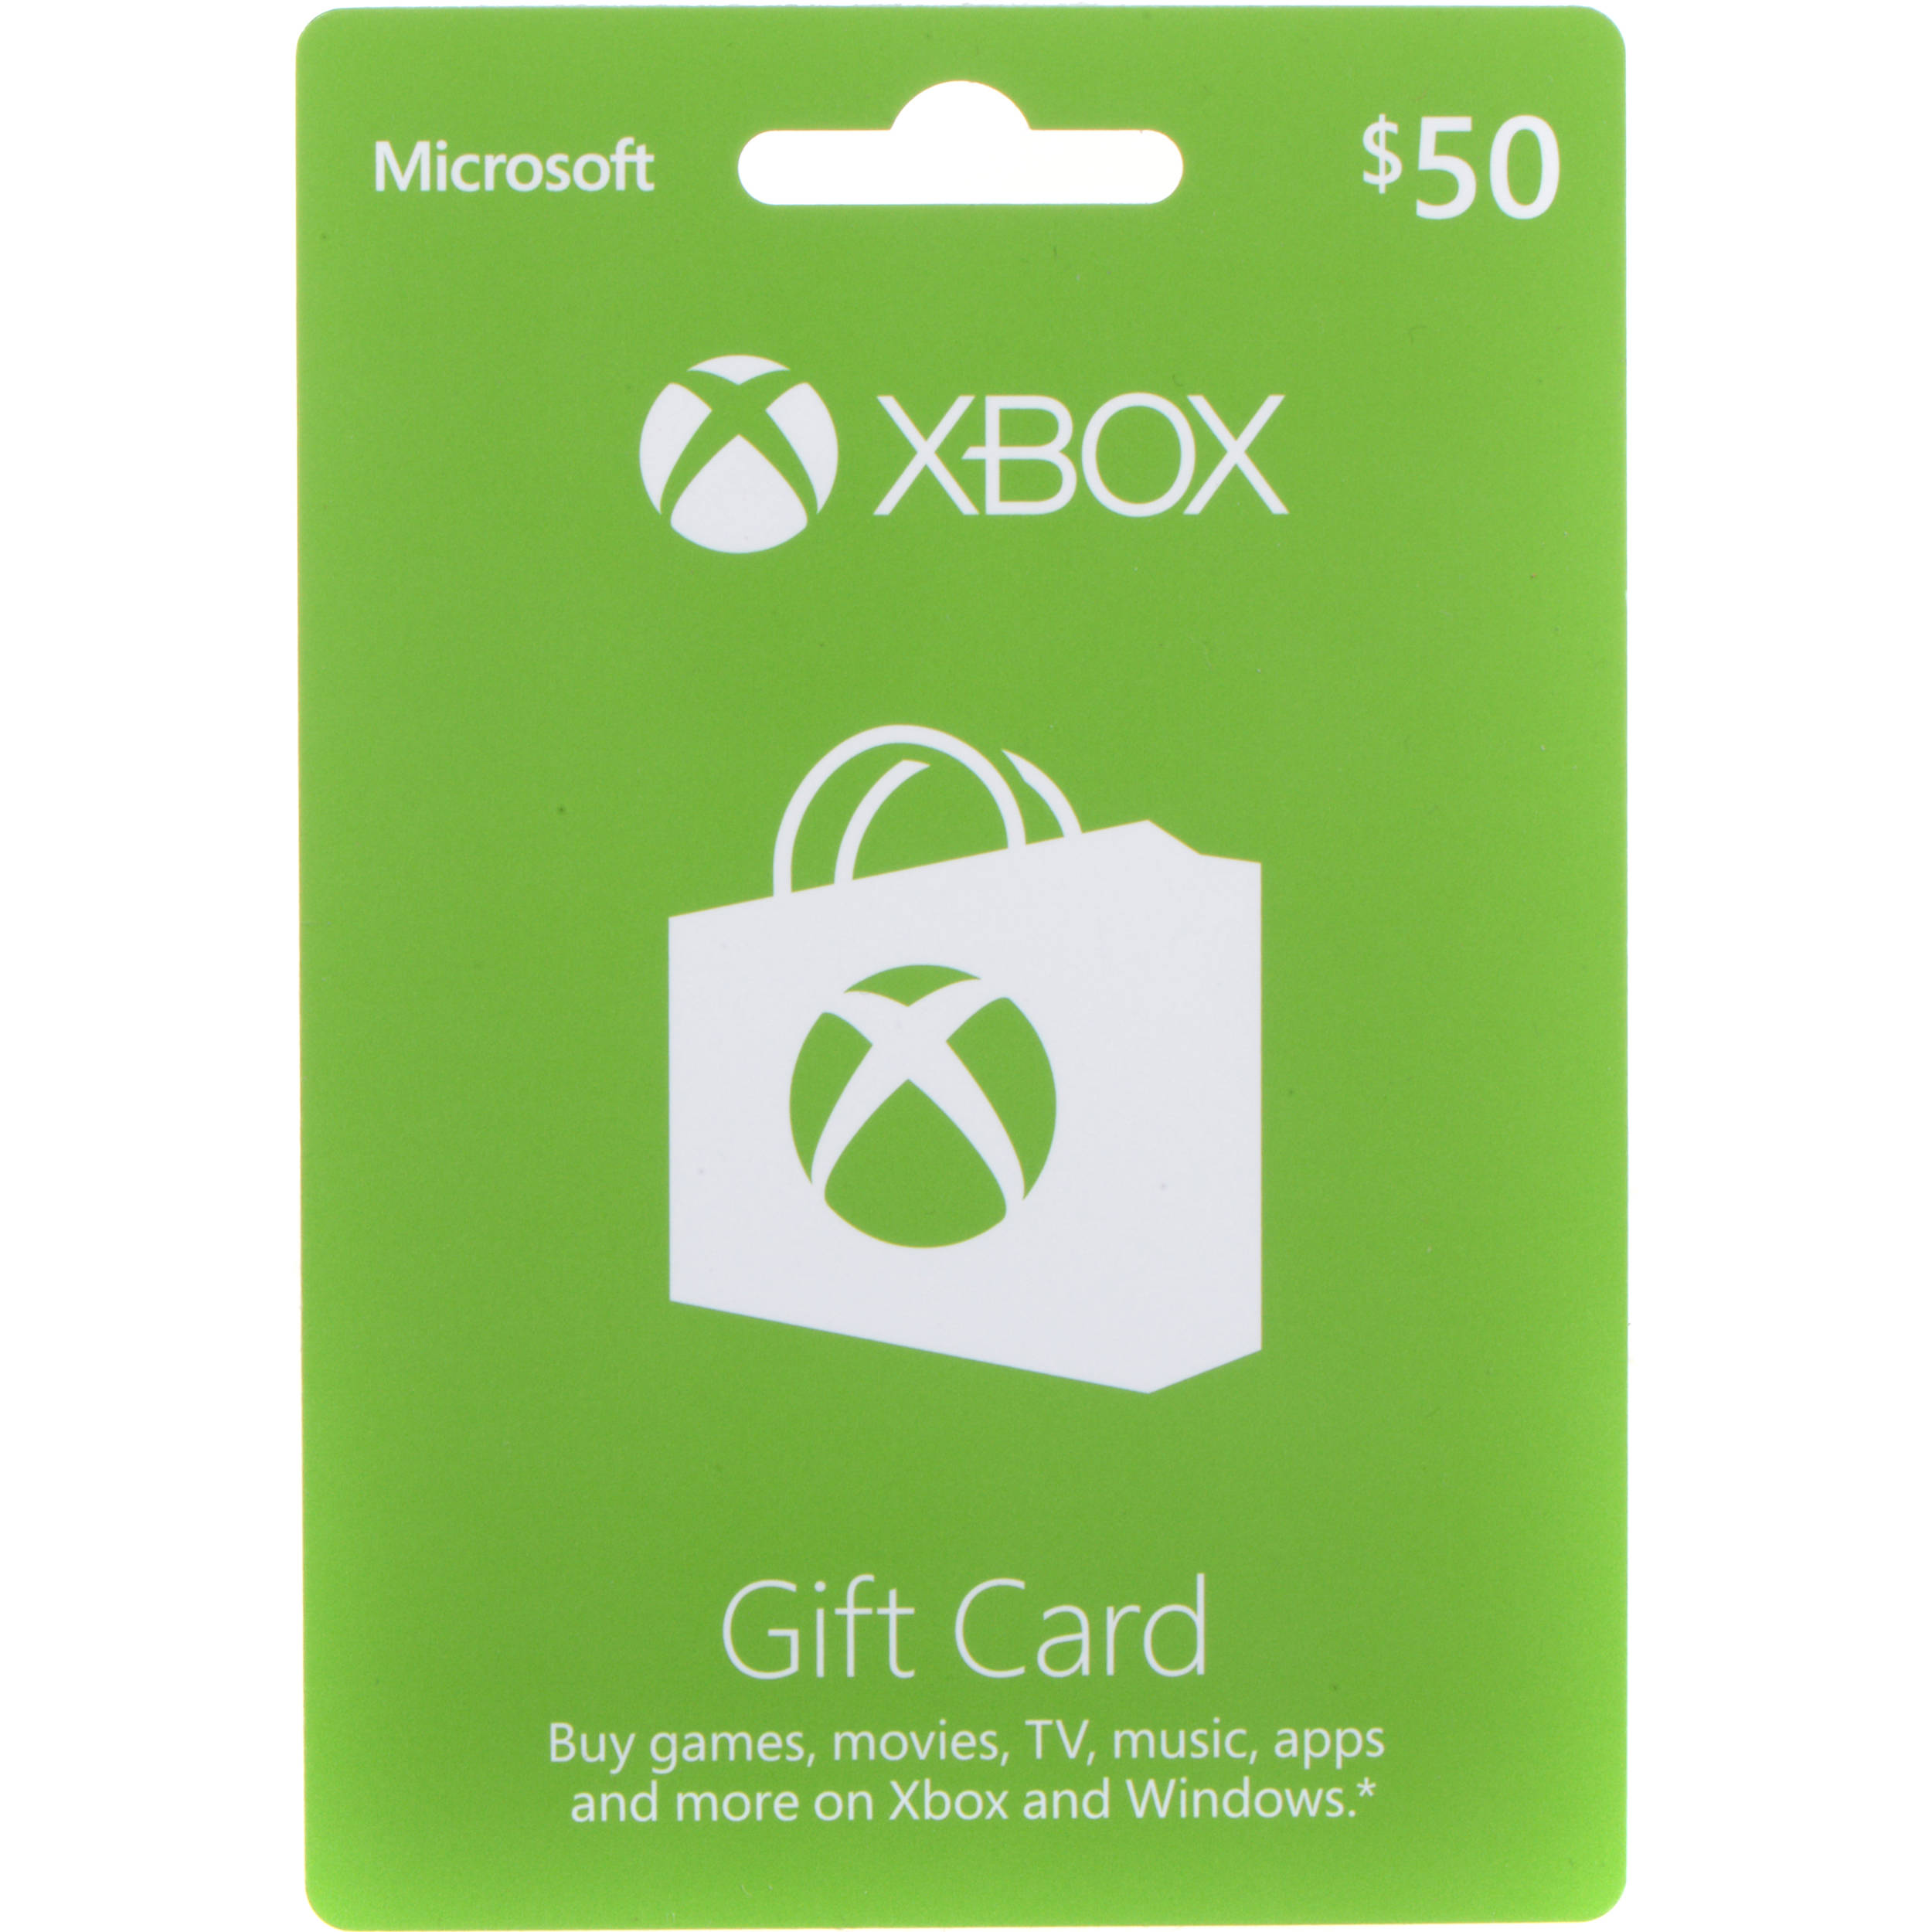 how to pay for xbox live without a credit card